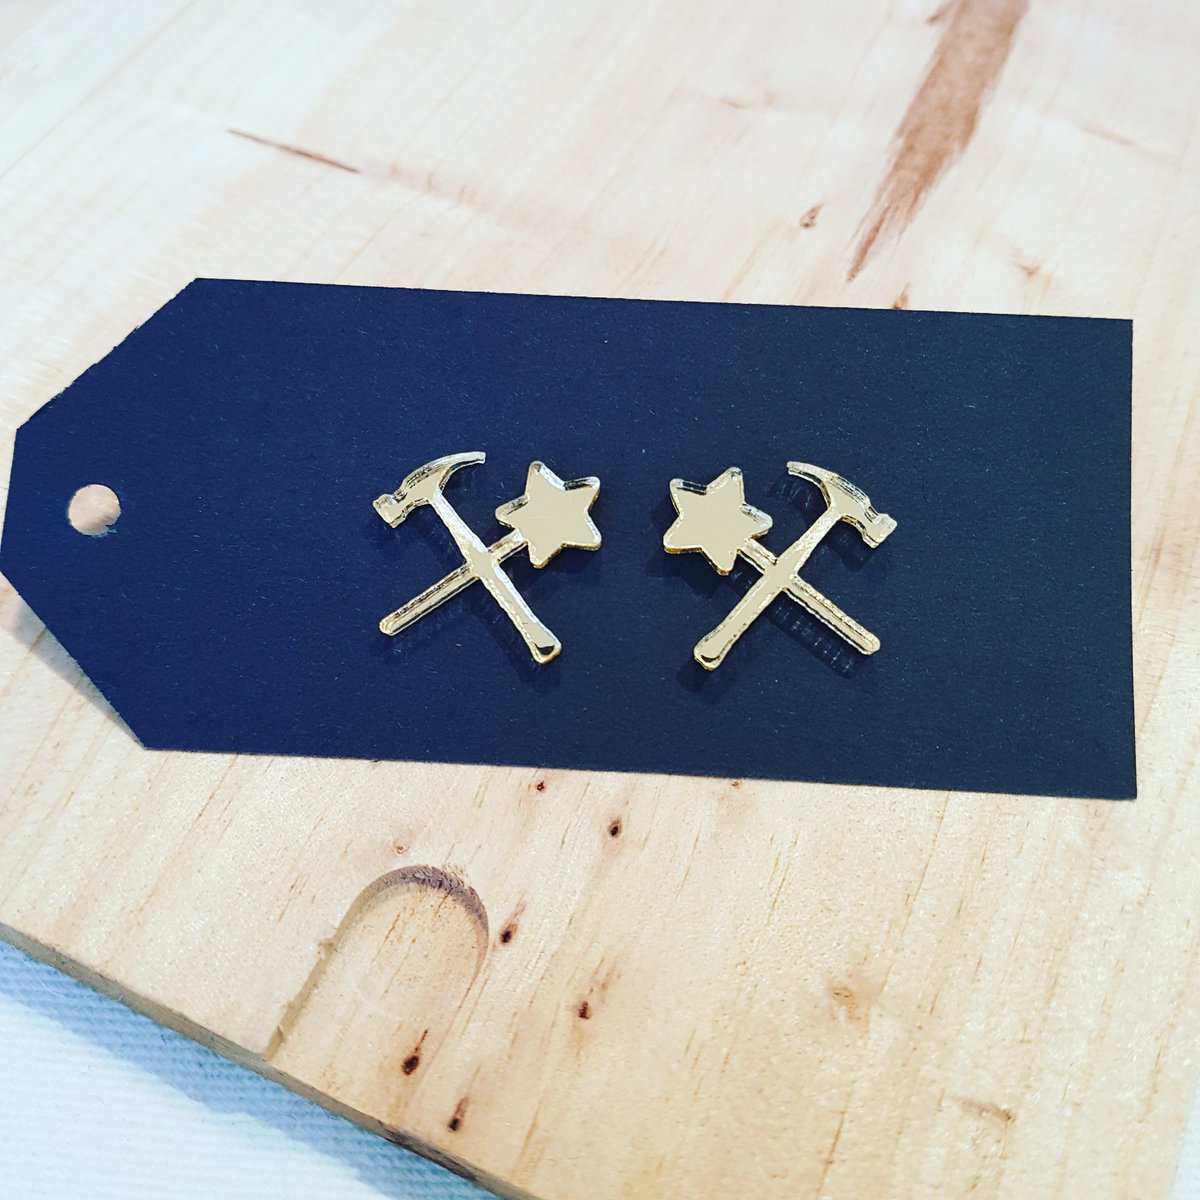 What do you all think of our custom made earrings??? We love this gold mirror acrylic! 
#hammersandwands #popupshop #kidsgifts #babygifts #womens #teengifts #quirkystuff #quirkyearrings #lasercut #lasercutearrings #gold #mirror #custommade #australianmade #moxandco